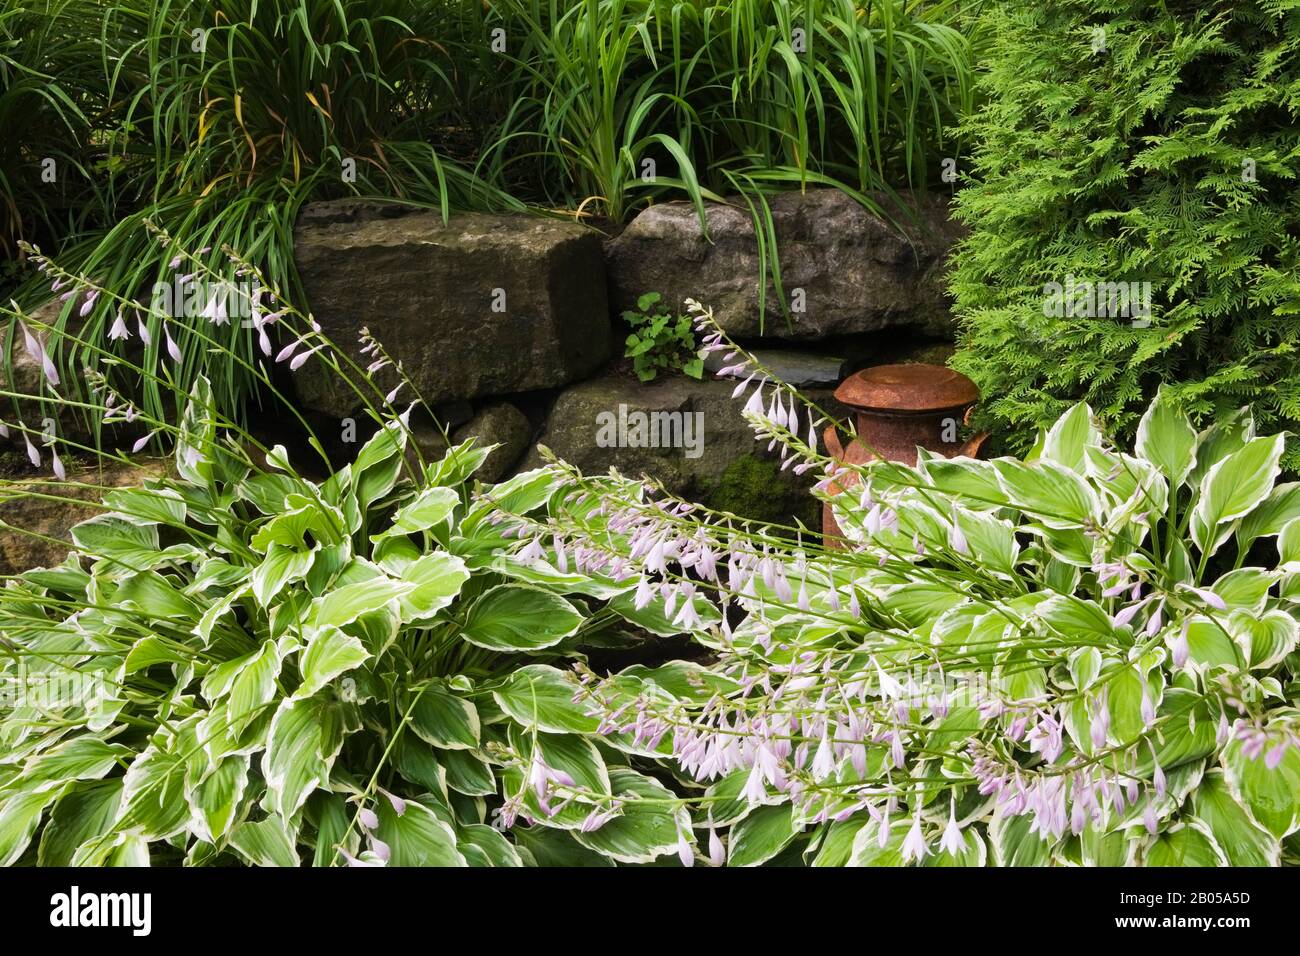 Rock edged border with mauve flowering Hosta plants, rusted antique milk can and Thuja occidentalis - Cedar tree in backyard garden in summer. Stock Photo